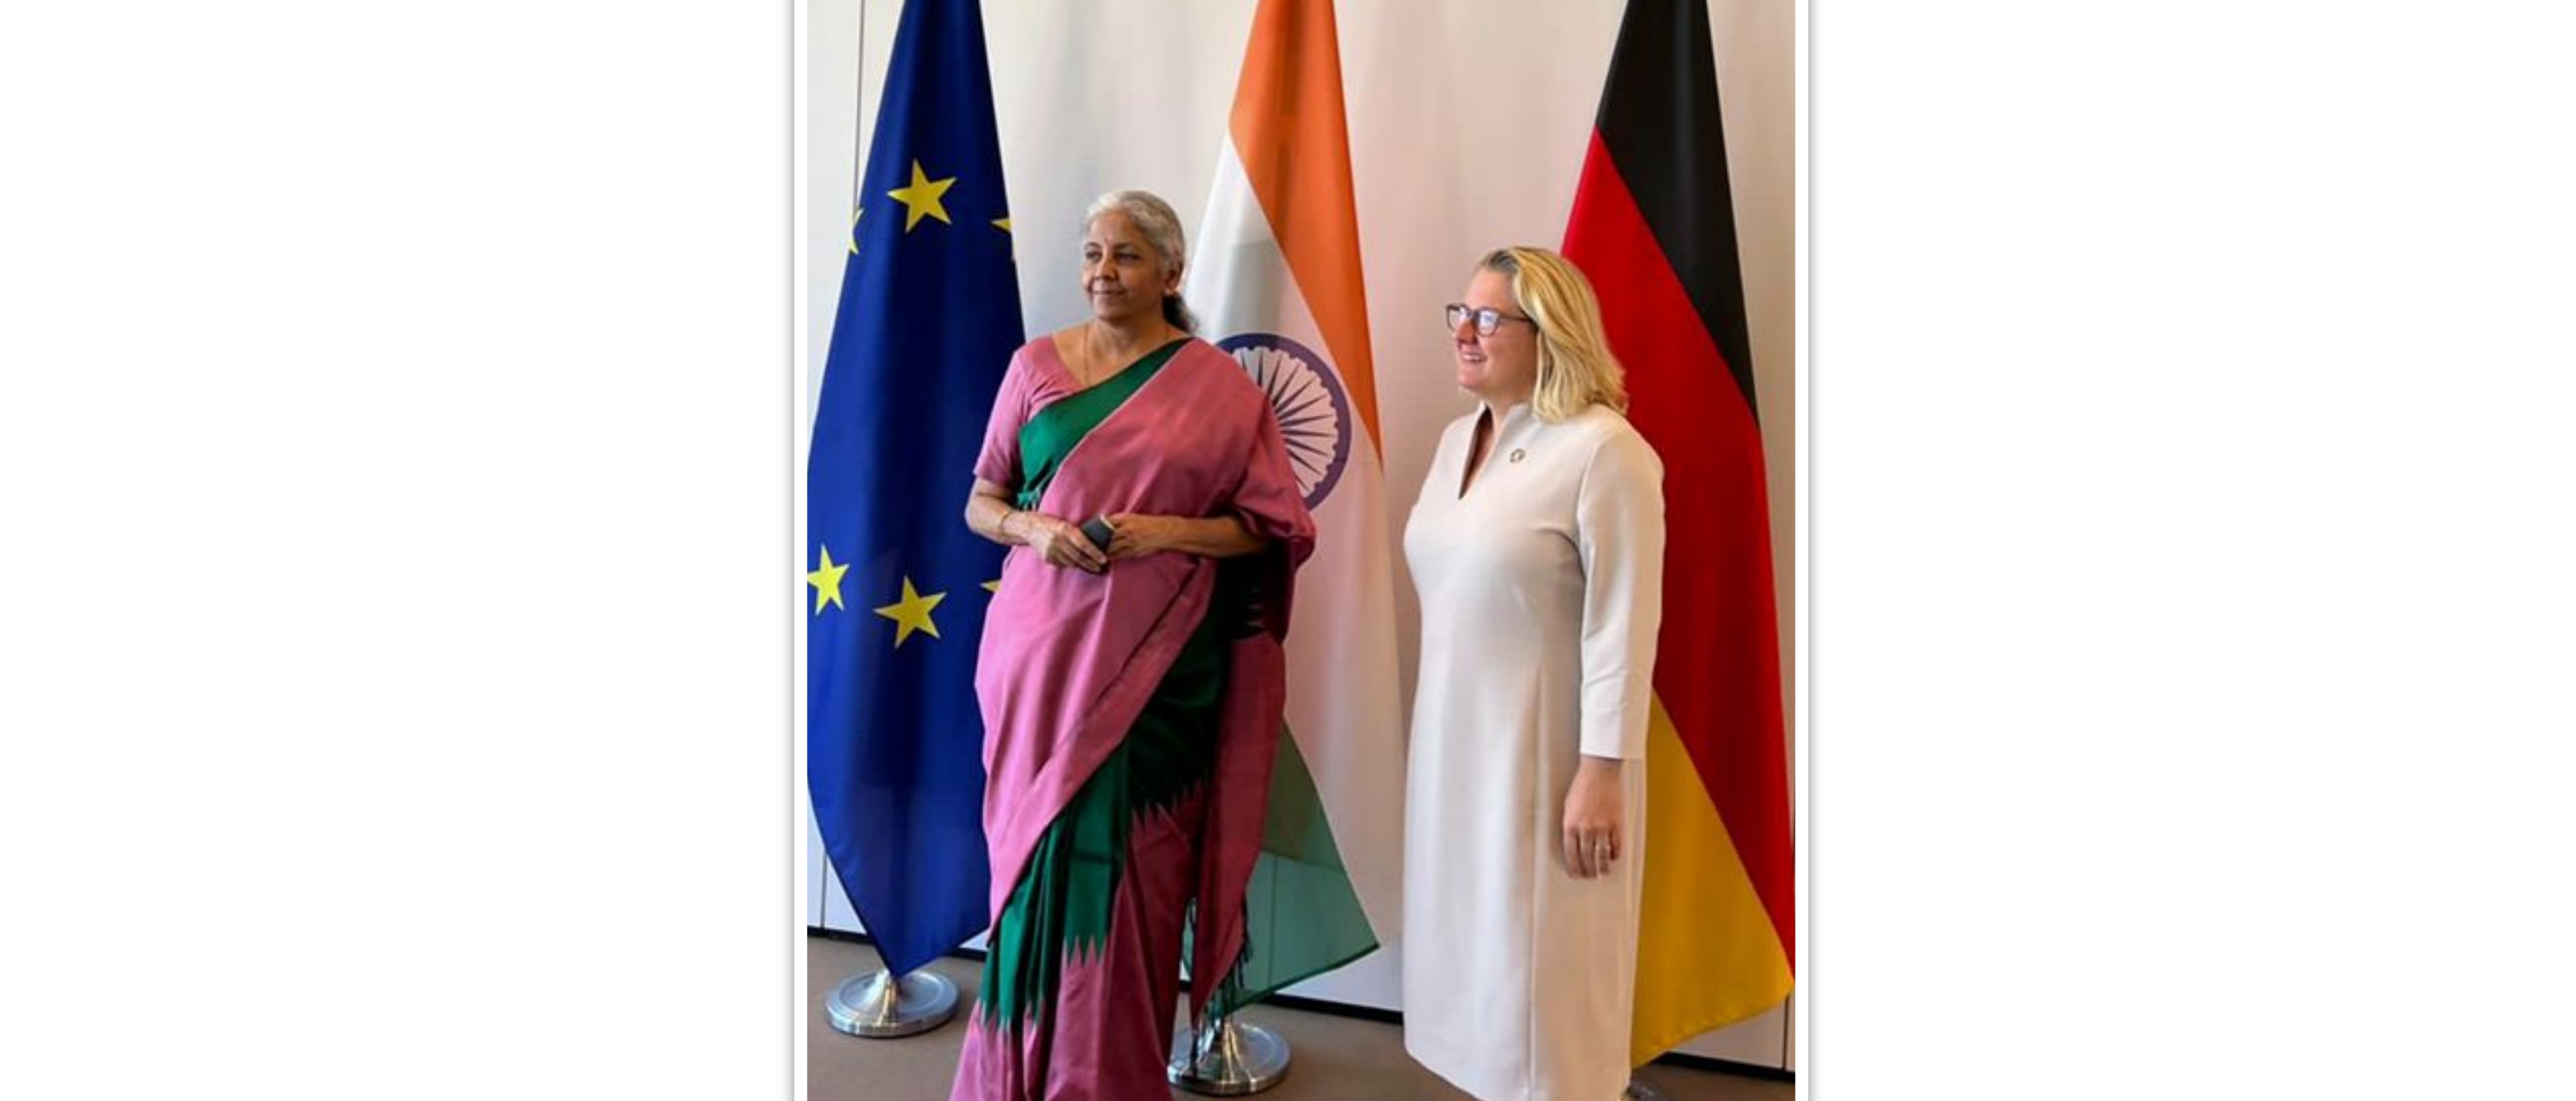  Minister of Finance Smt. Nirmala Sitharaman with German Minister for Economic Development and Cooperation MdB Svenja Schulze at the 6th India-Germany Inter-Governmental Consultations